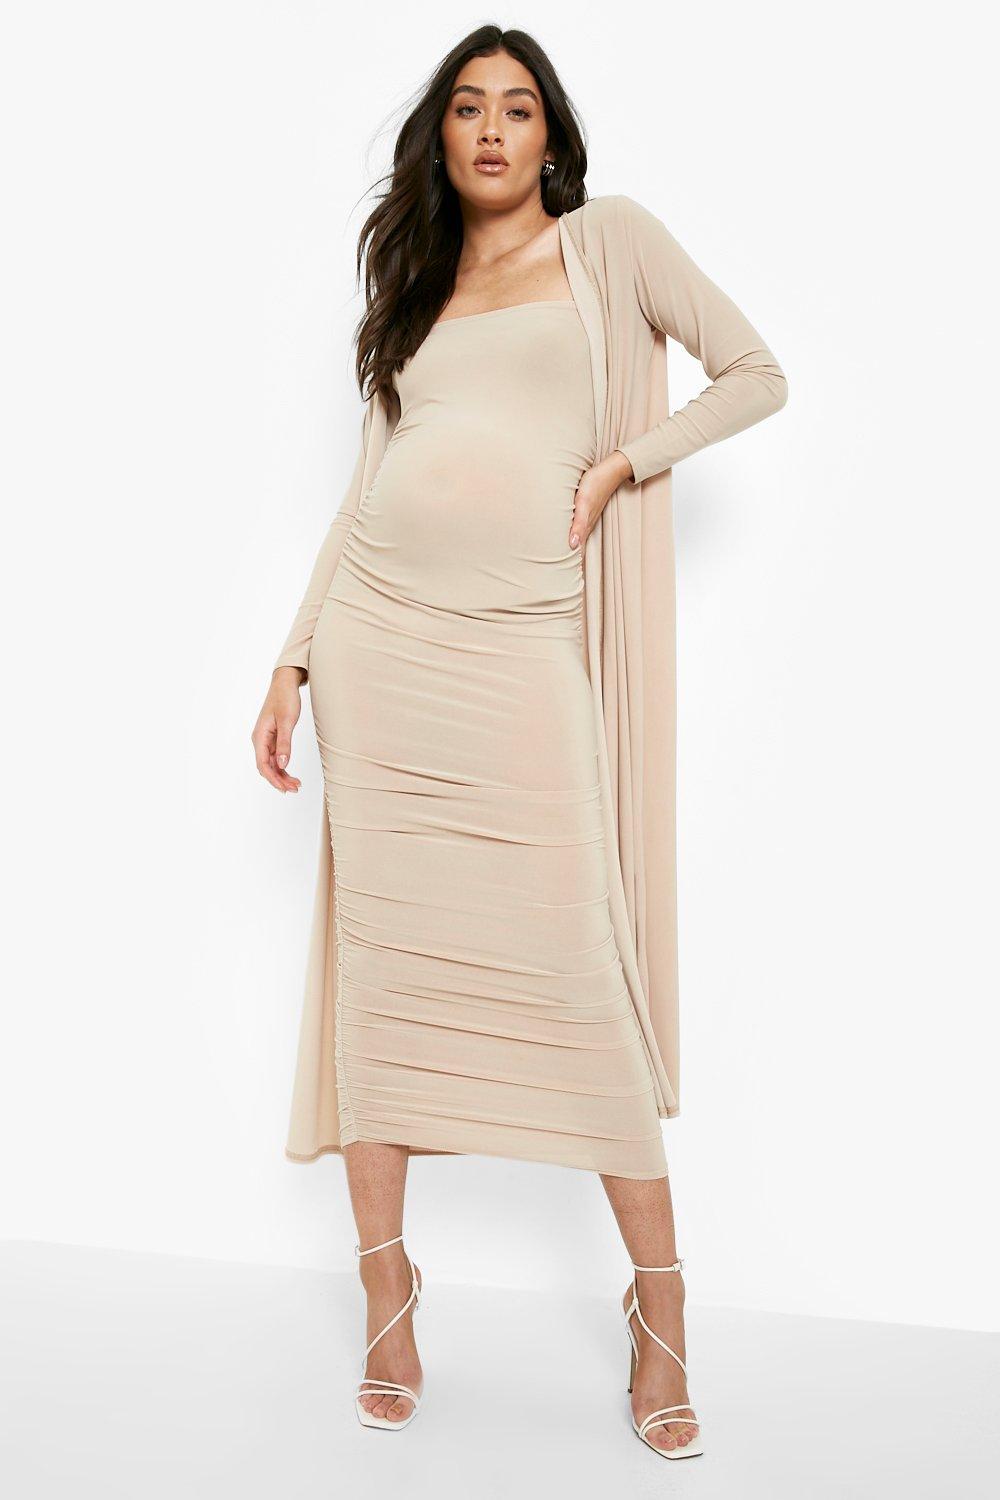 Maternity Square Neck Ruched Duster Dress Set